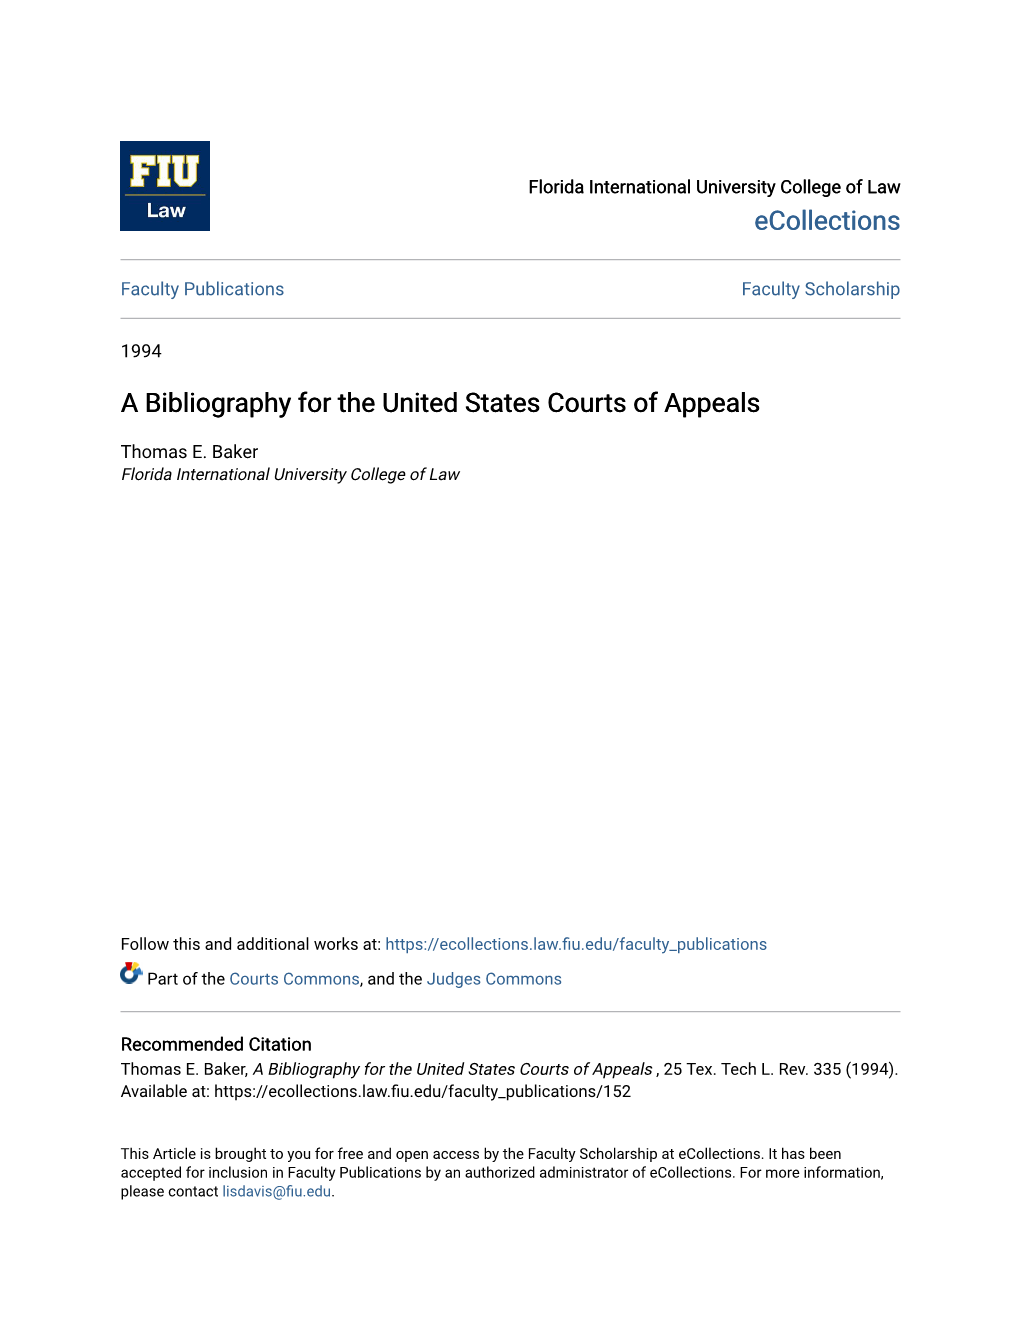 A Bibliography for the United States Courts of Appeals